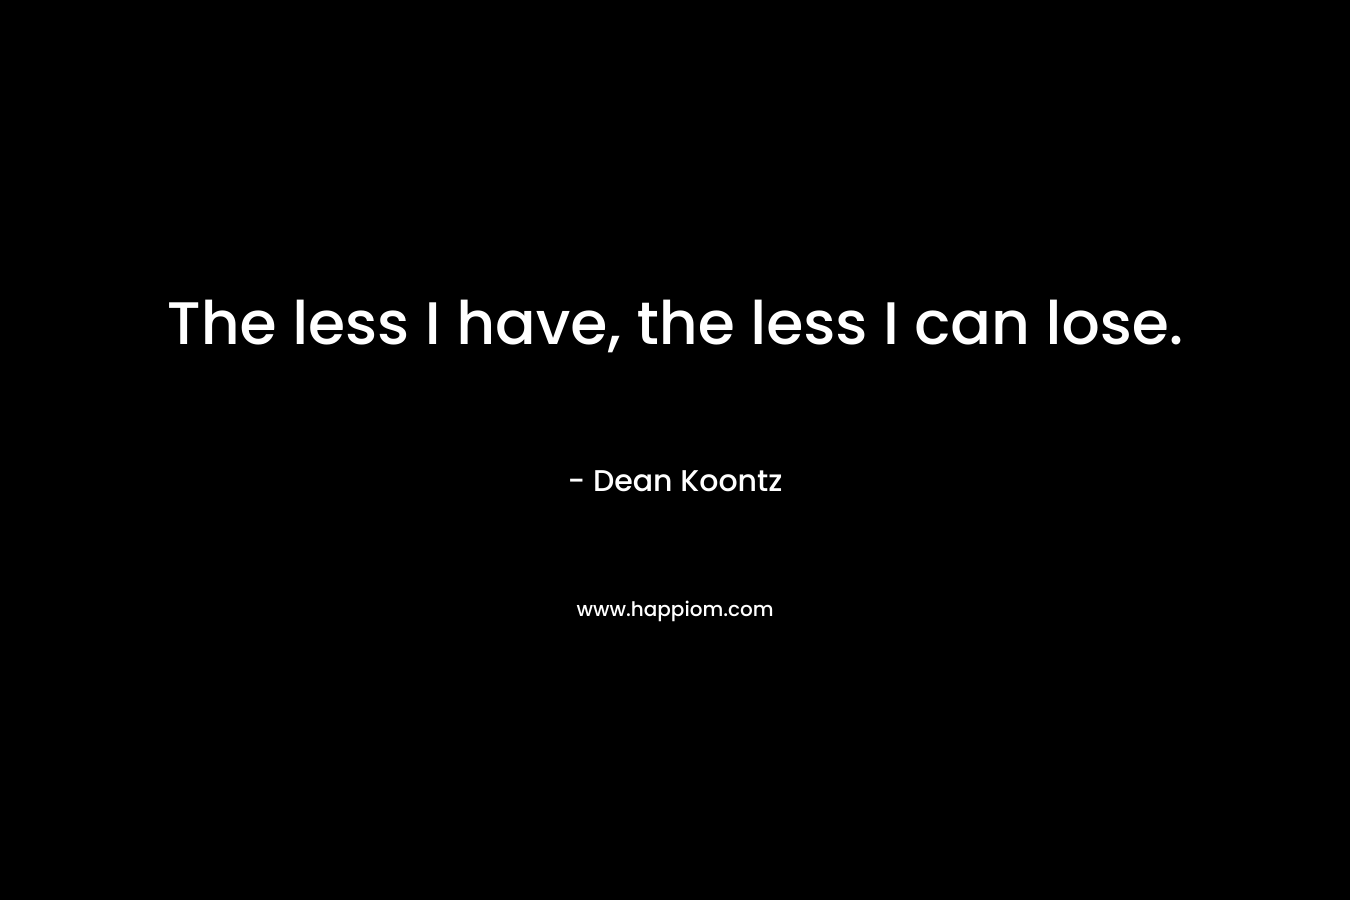 The less I have, the less I can lose.